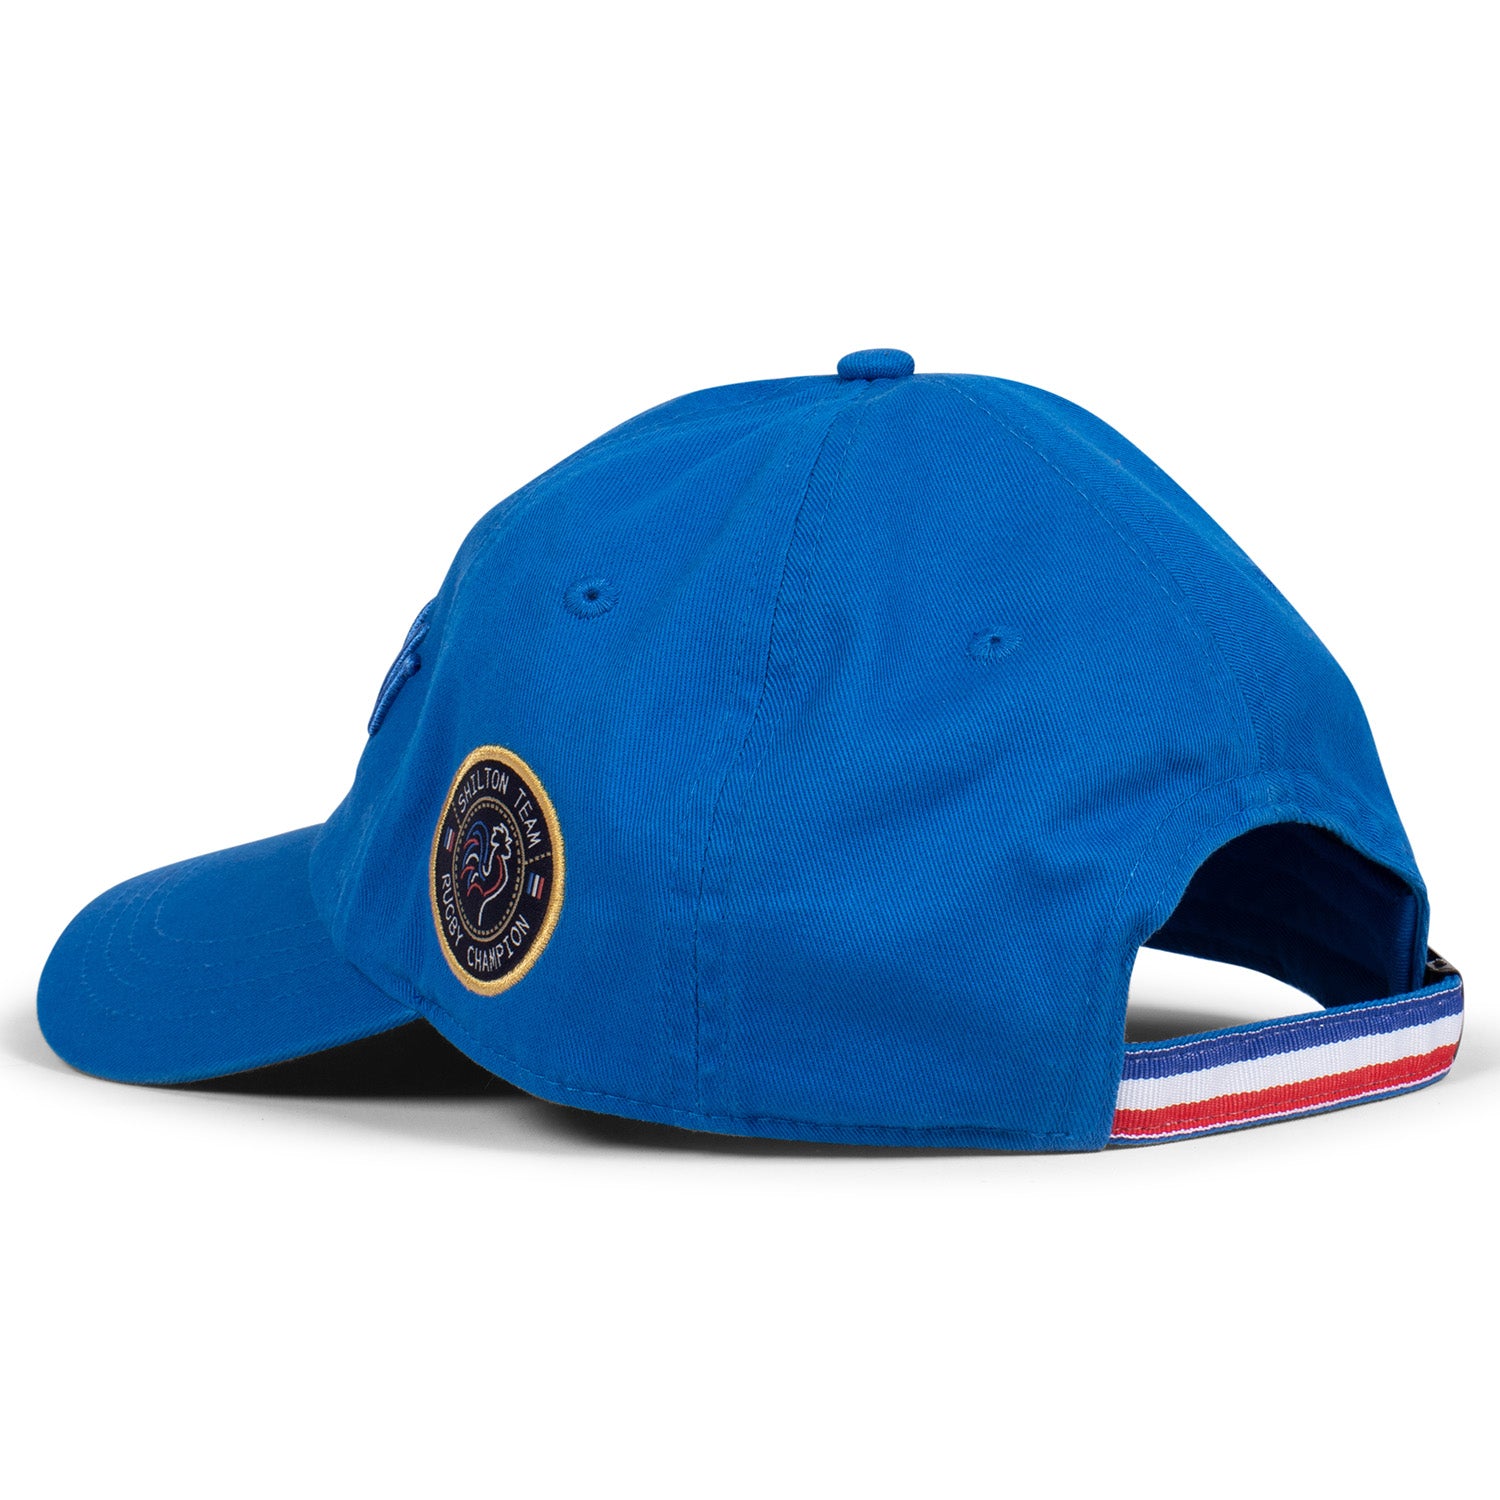 Casquette rugby France